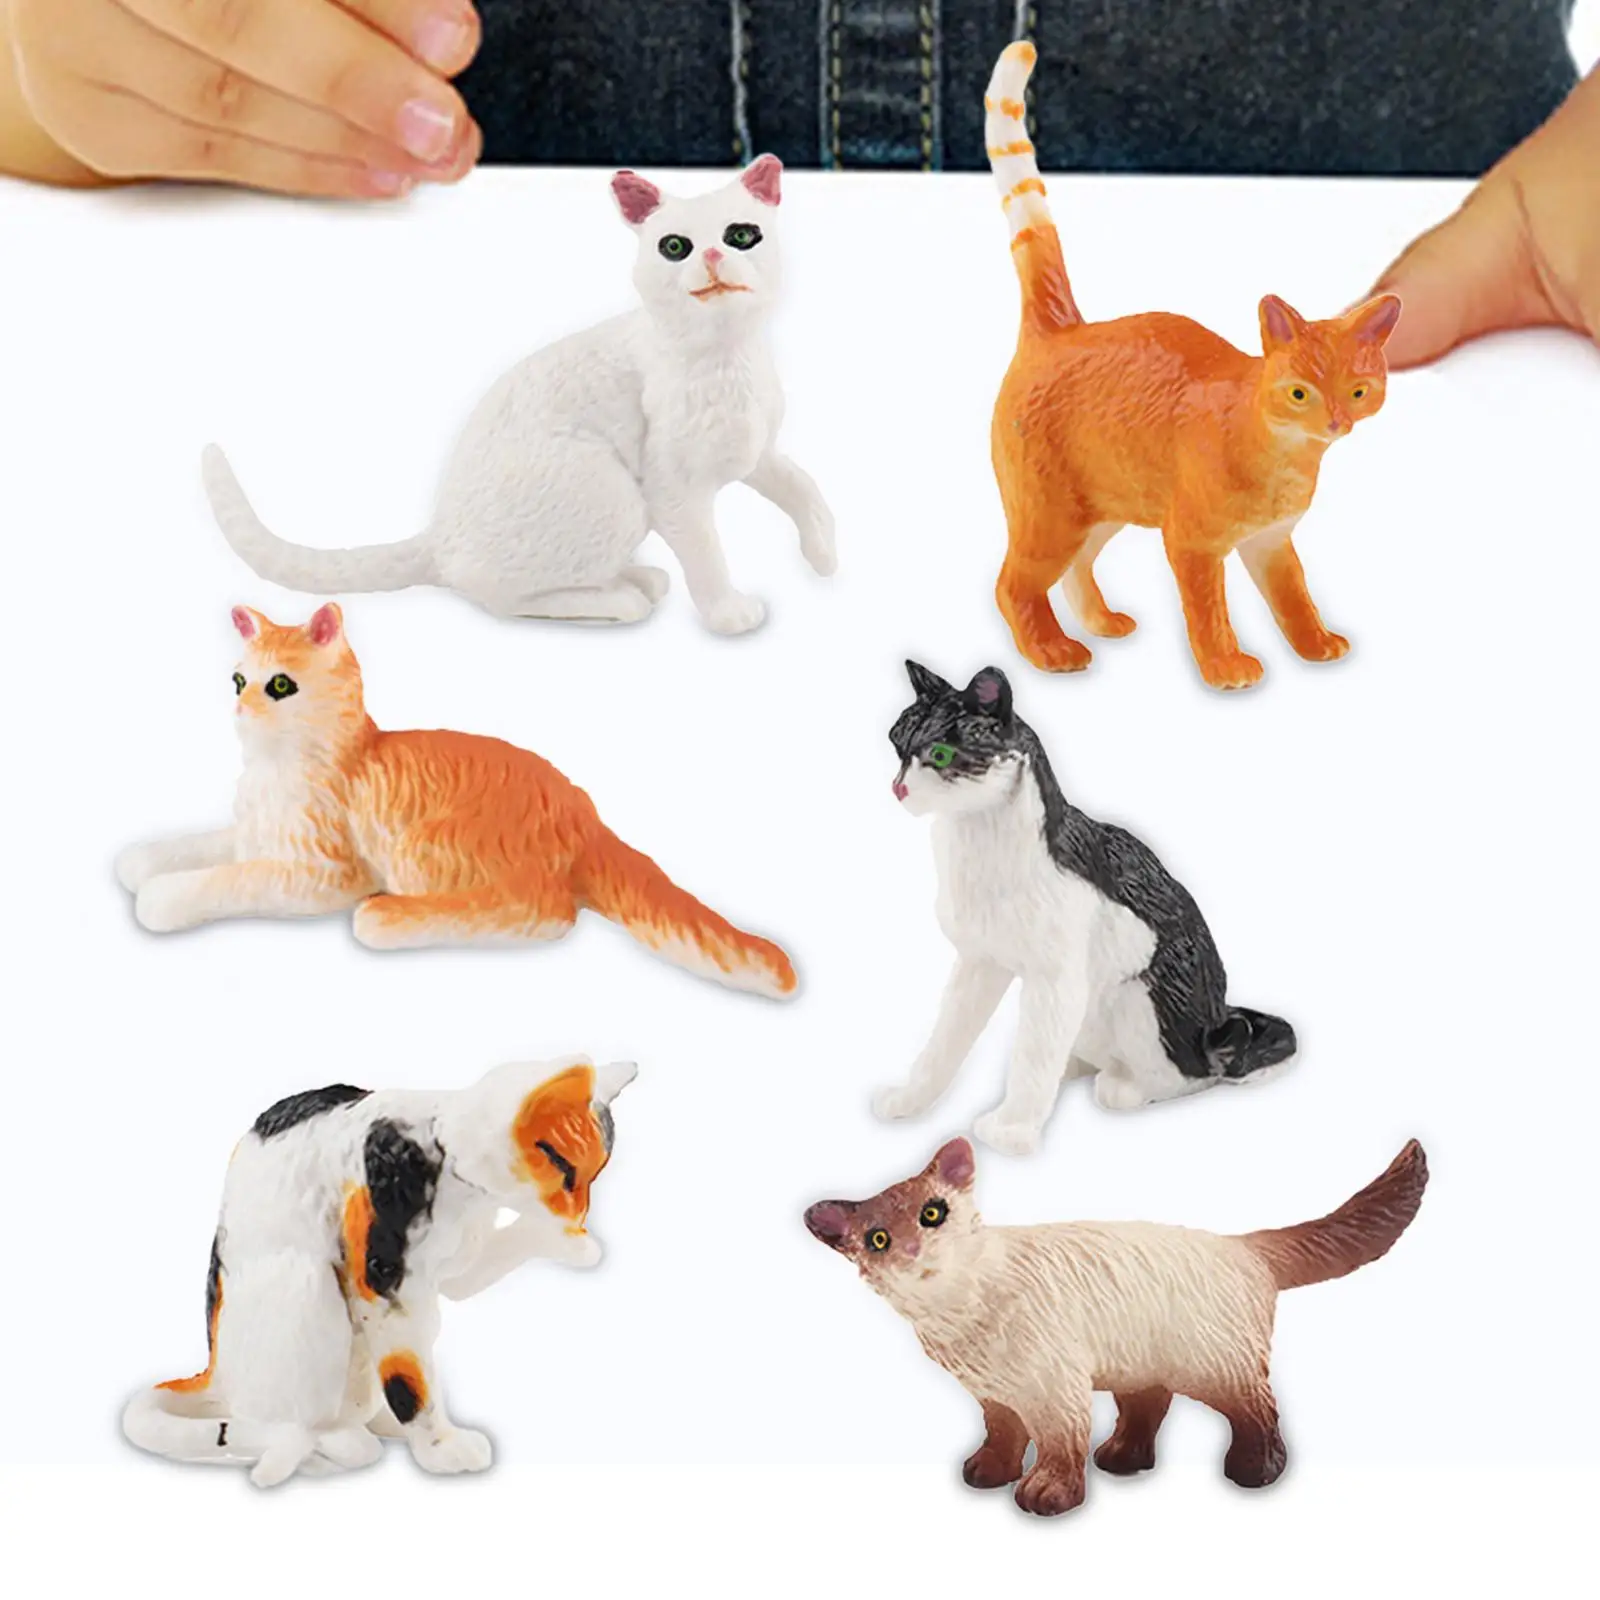 Simulation Cat Toy Animal Model Home Decoration Collectibles Realistic Ornament Figurine for Office Yard Study Presents Kids